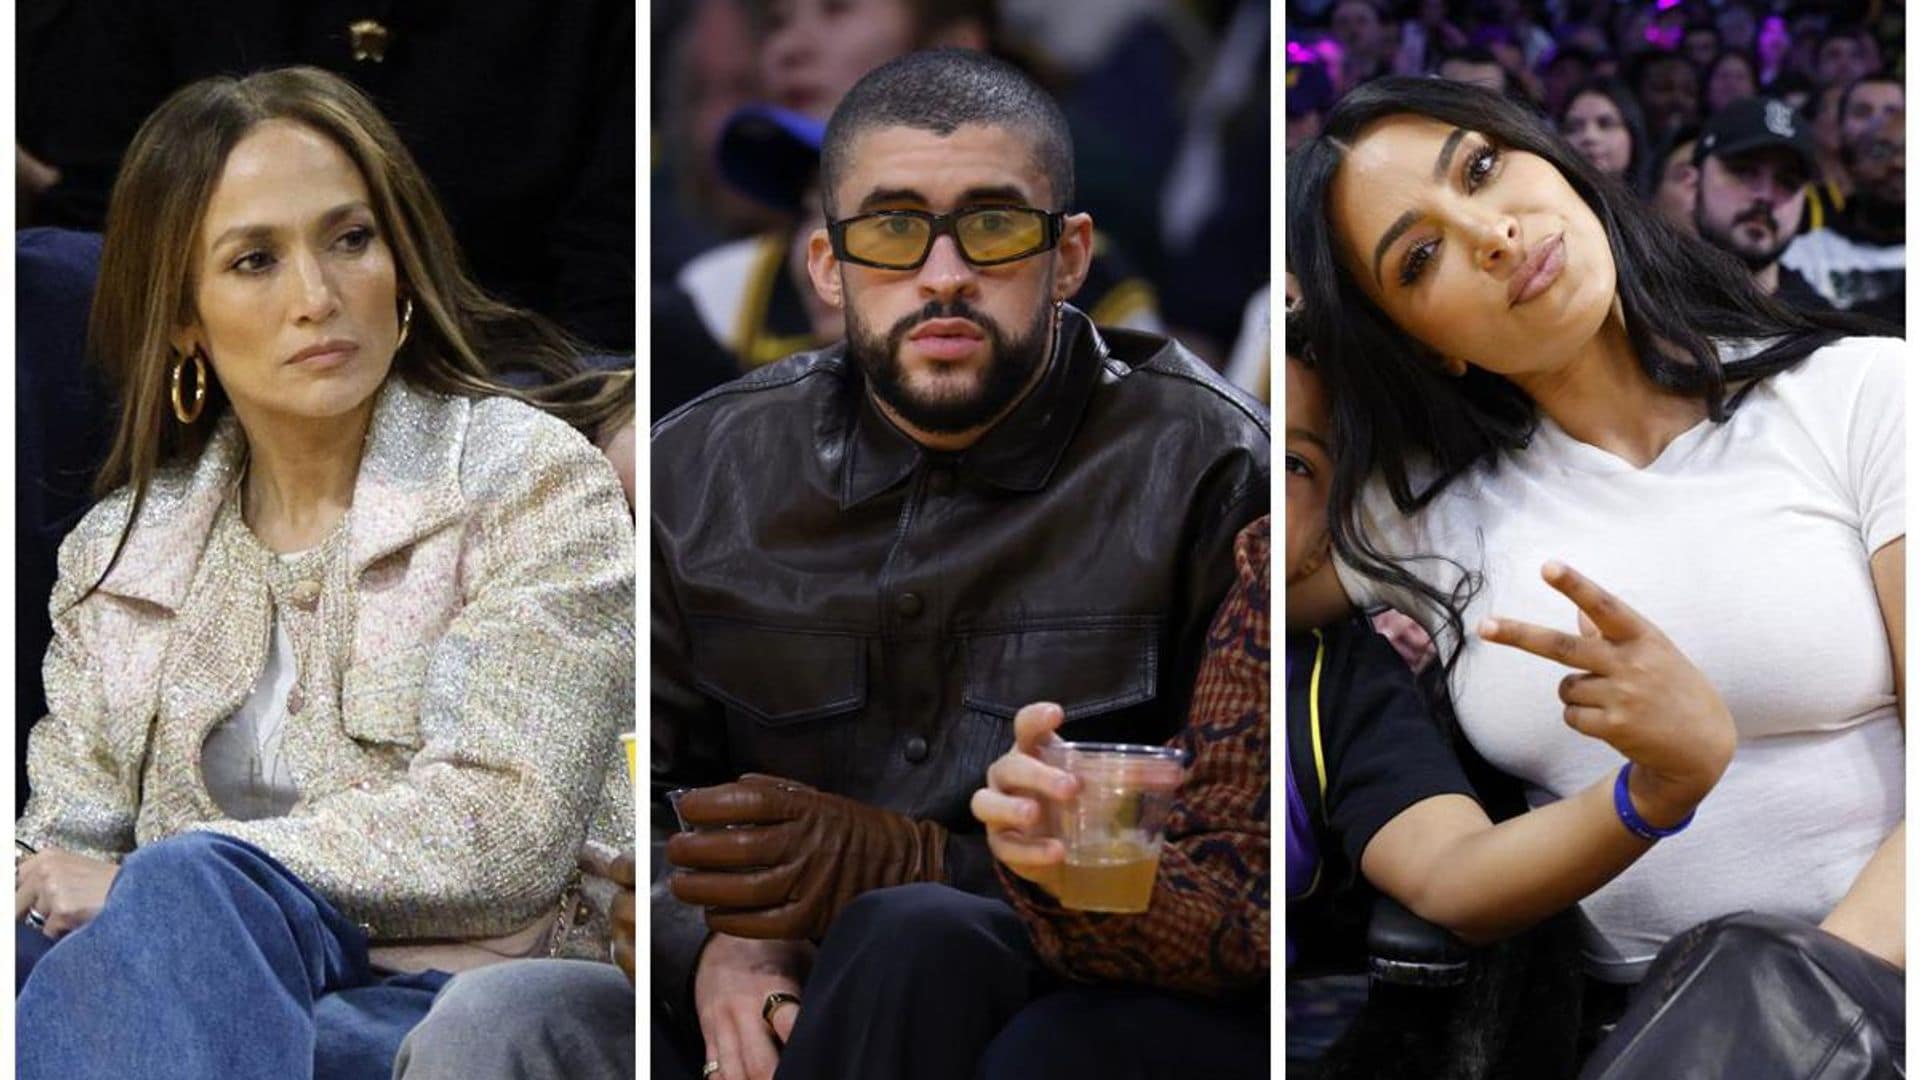 From JLo to Bad Bunny: Celebrities flock to Los Angeles Lakers vs. Golden State Warriors game